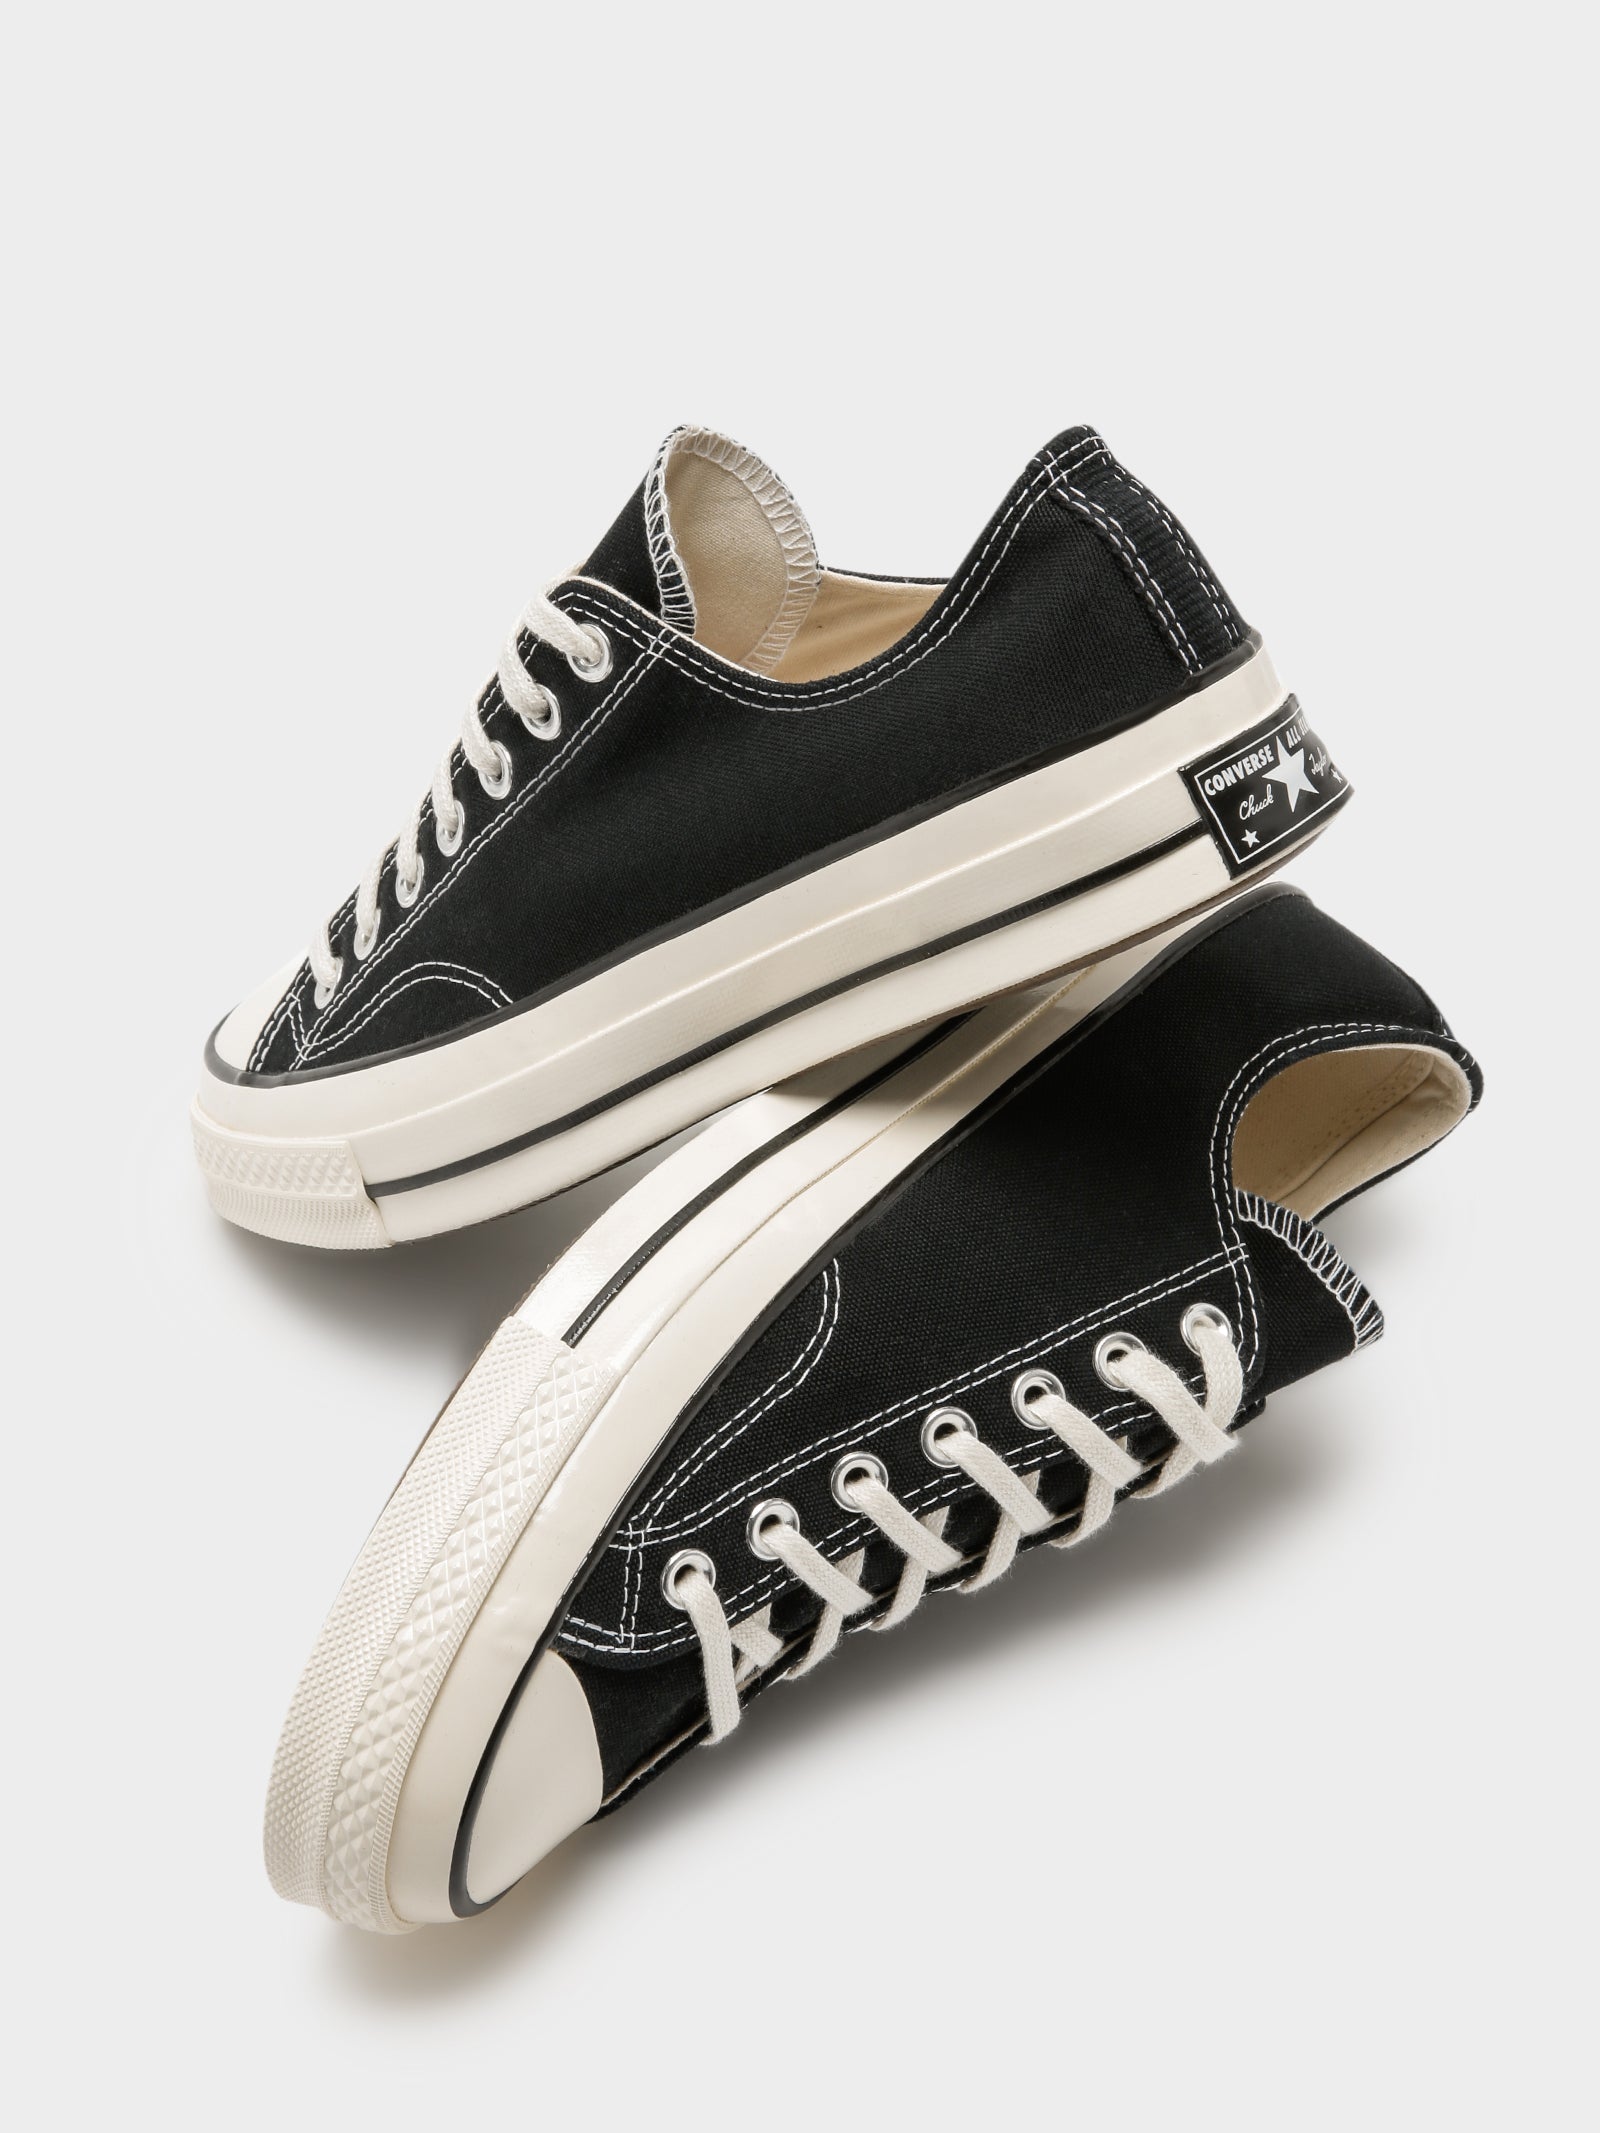 Chuck Taylor All Star 70 Top Sneakers in Black - Glue